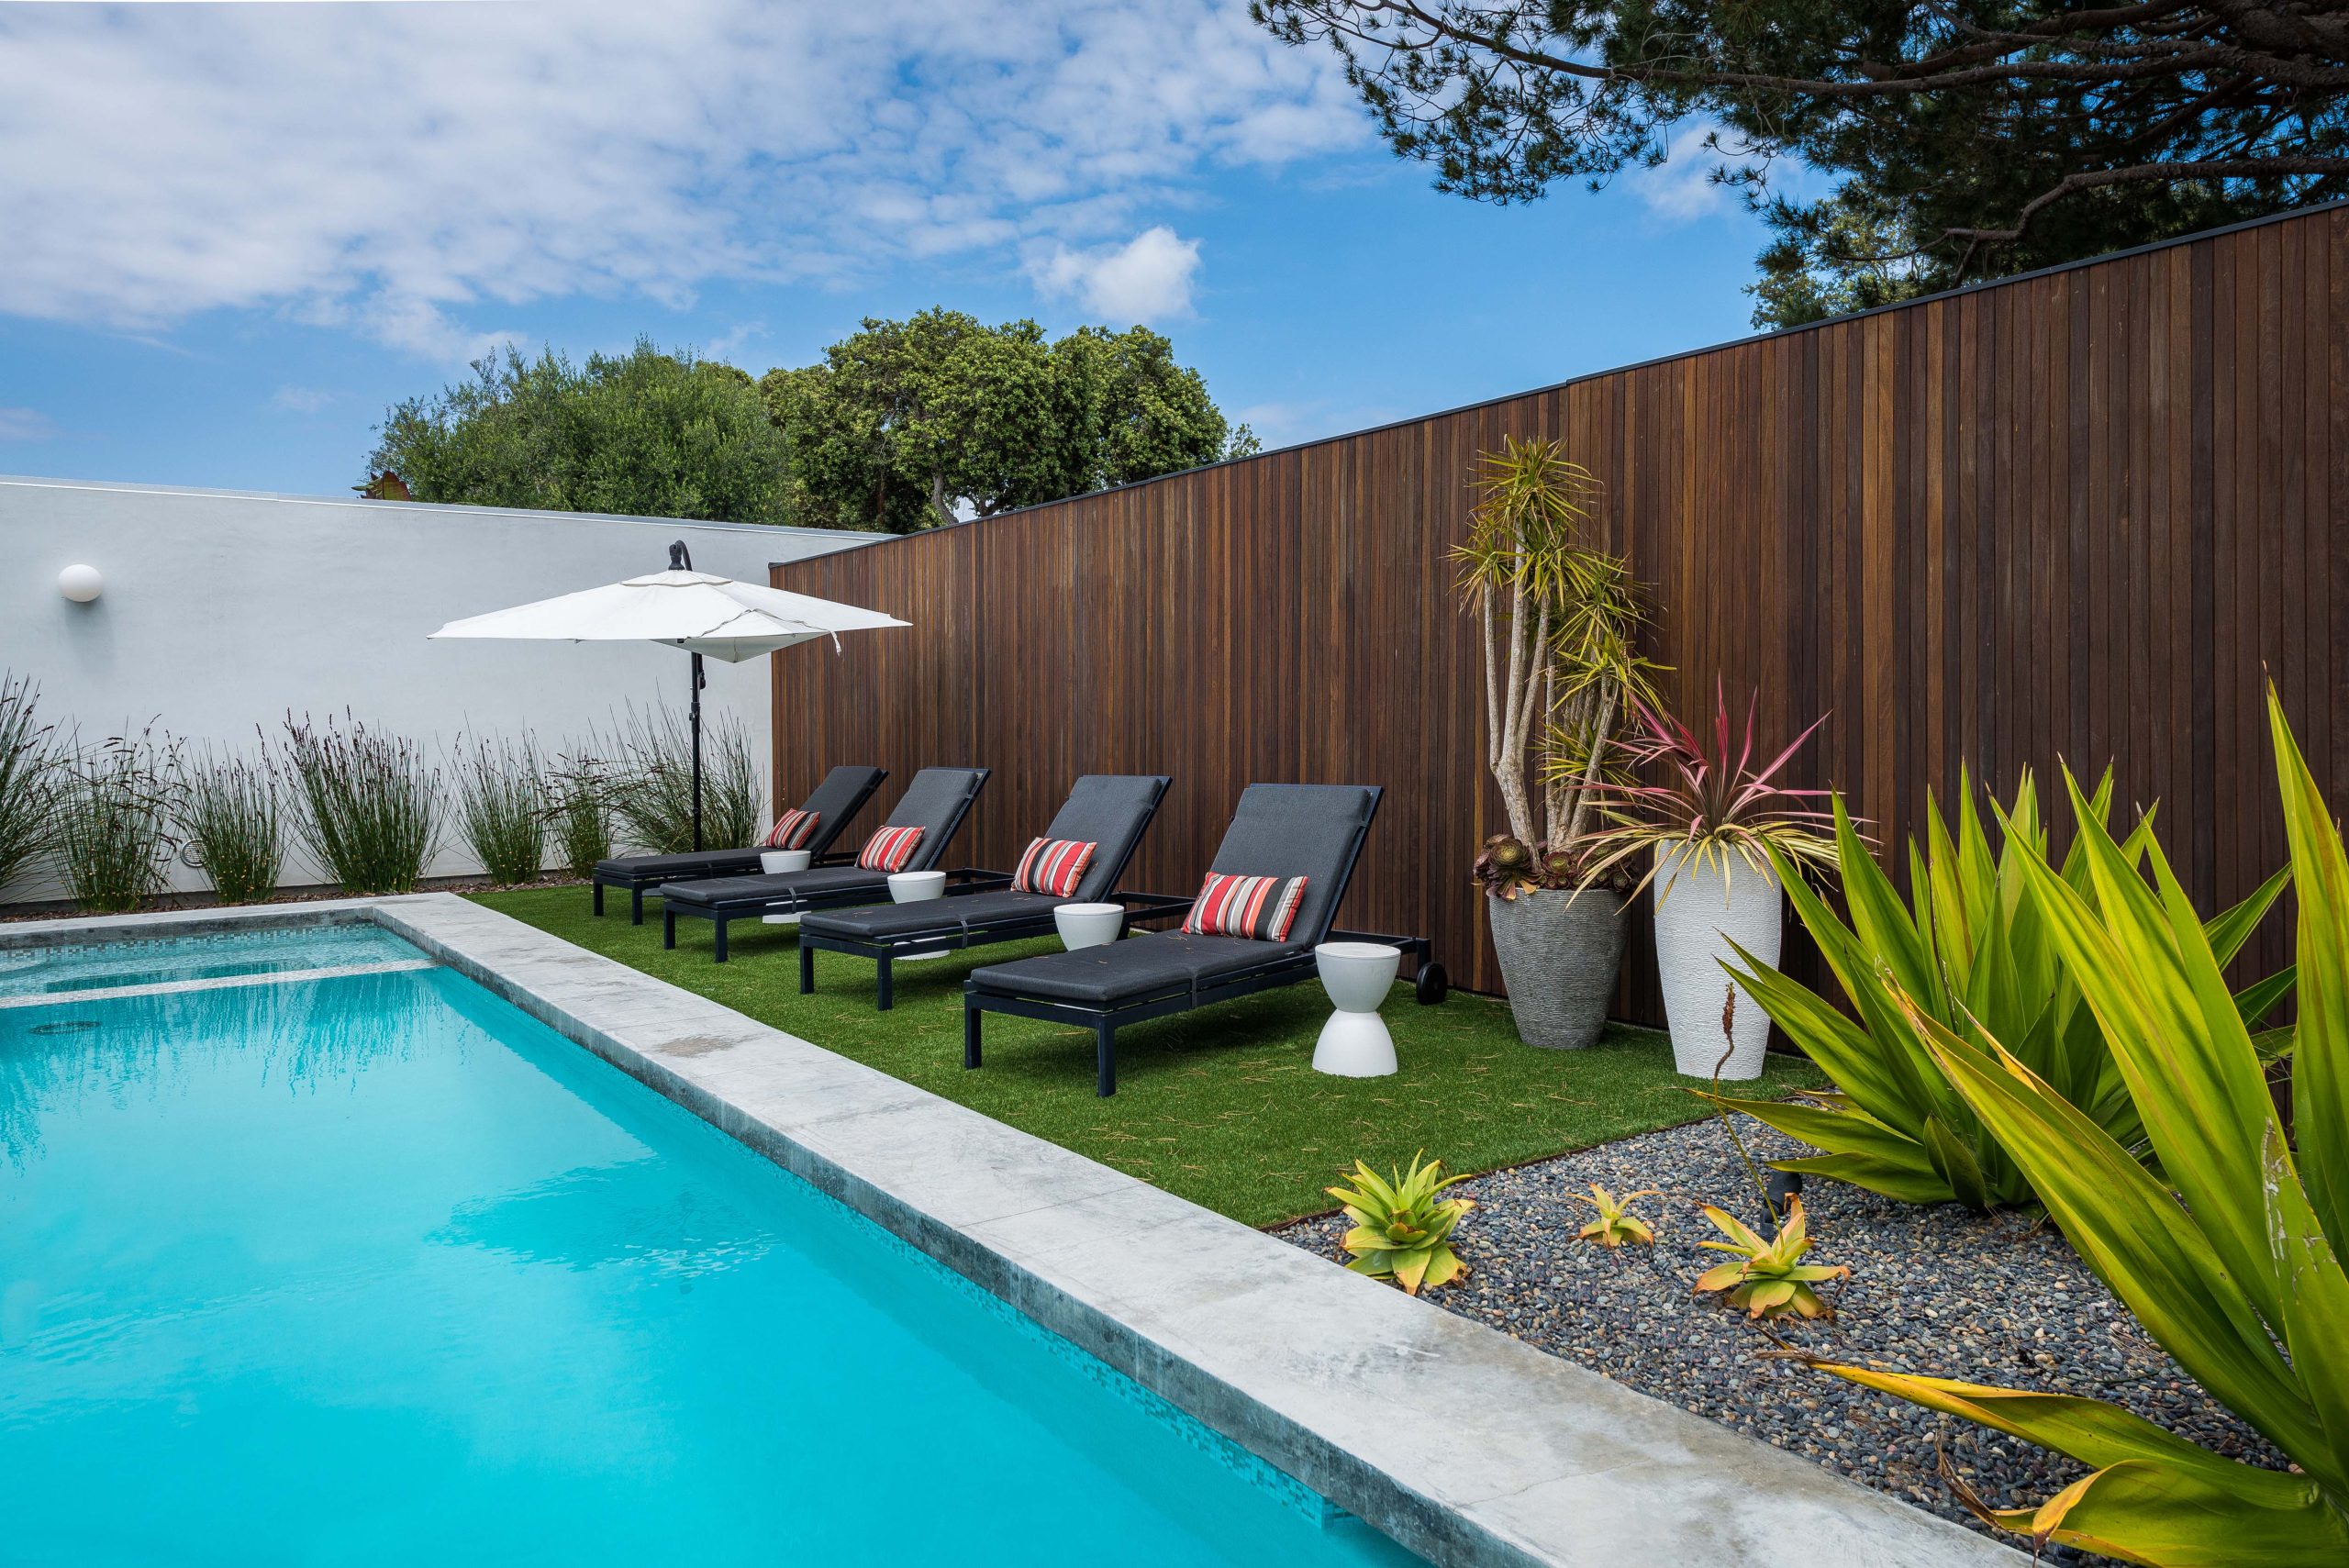 Why Turf For Your Pool Area